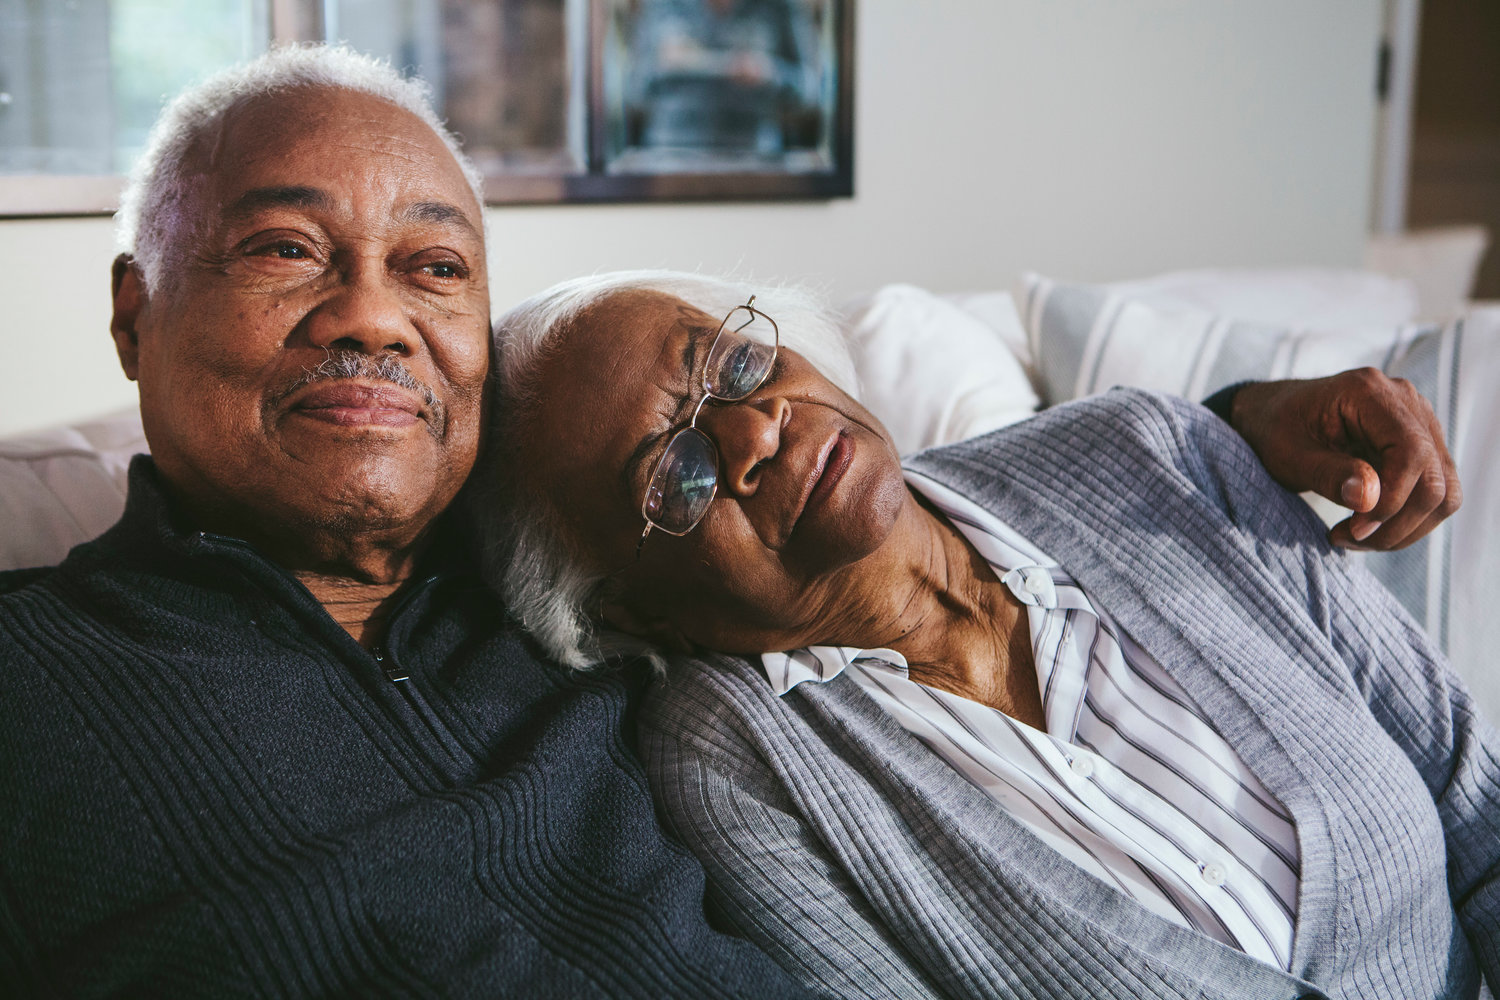 Among Black Americans aged 70 or older, more than one in five (21 percent) are living with Alzheimer’s disease.